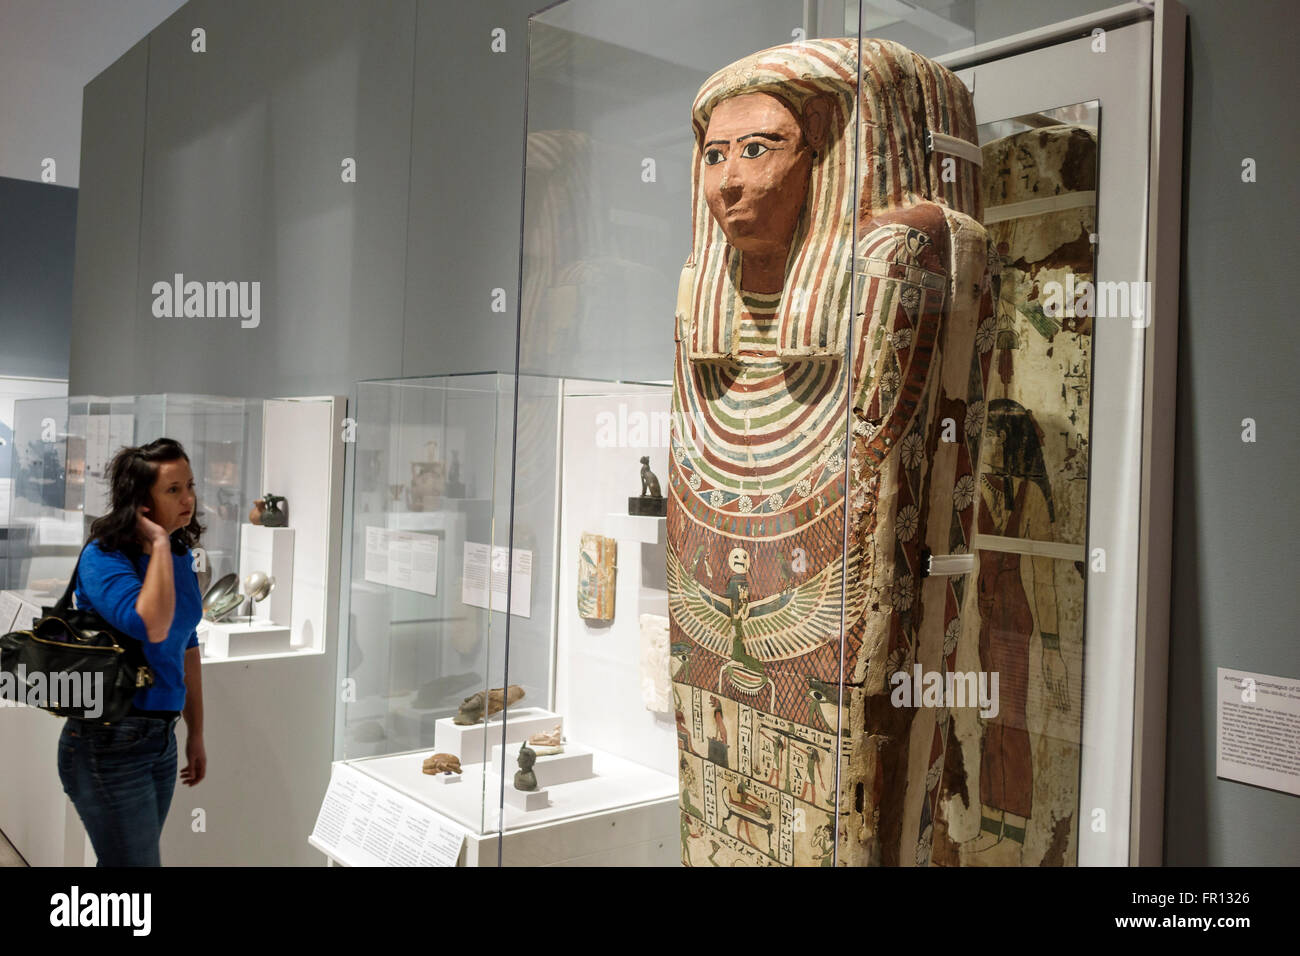 Tampa Florida,Waterfront Arts District,Tampa Museum of Art,interior inside,artwork,Anthropoid Sarcophagus of Shesep-Amun-tayes-herit,coffin,Egyptian,v Stock Photo